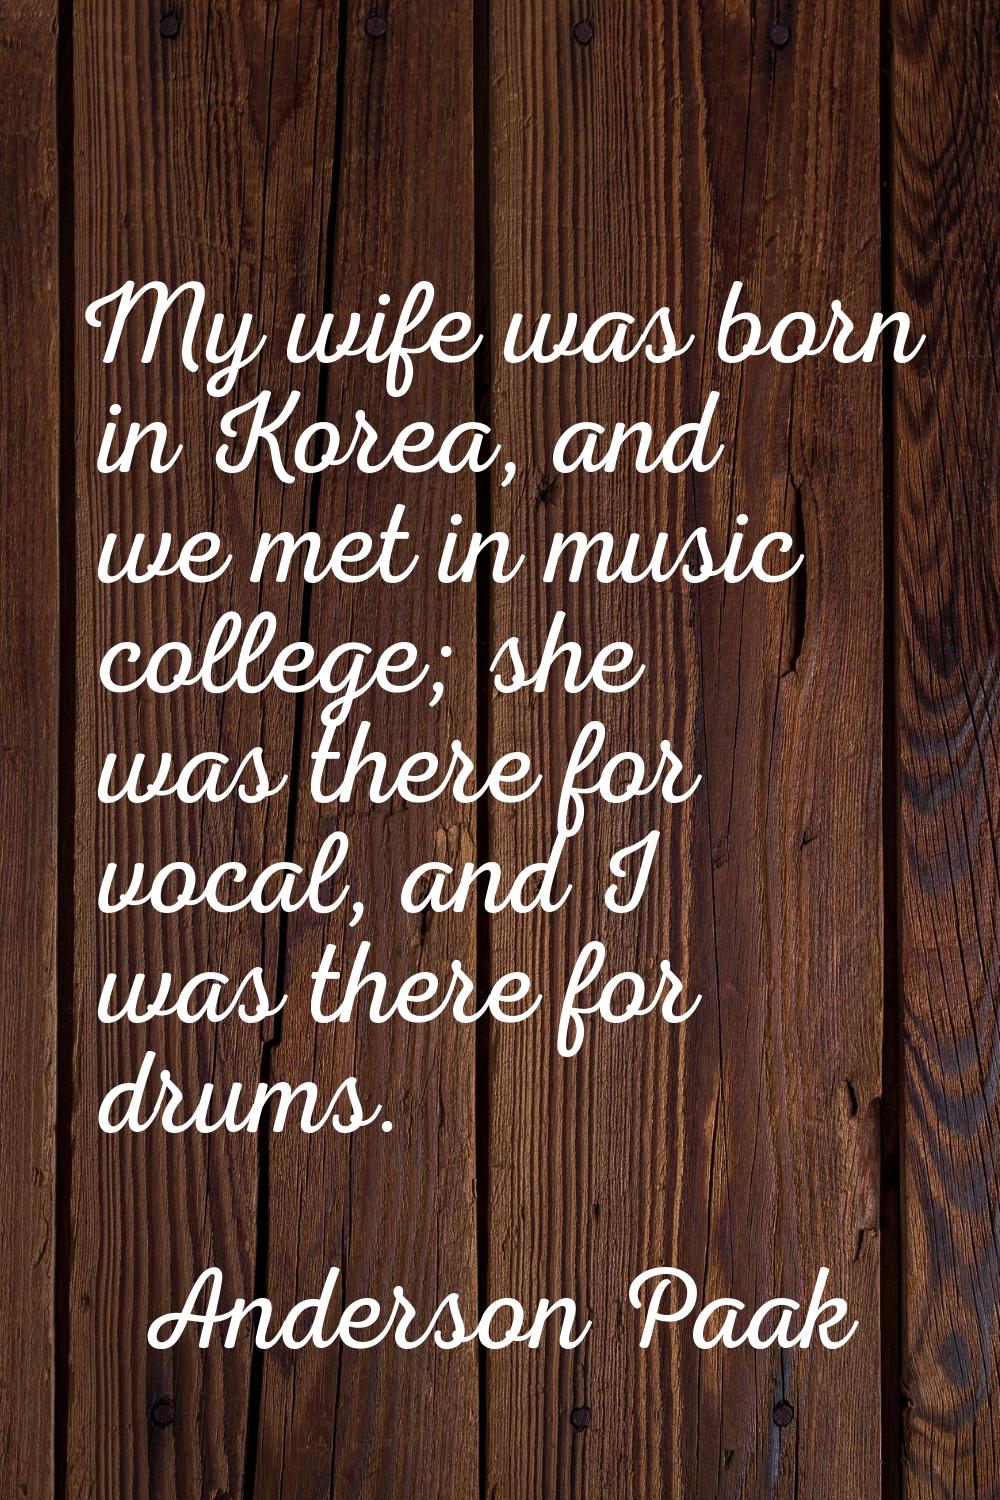 My wife was born in Korea, and we met in music college; she was there for vocal, and I was there fo